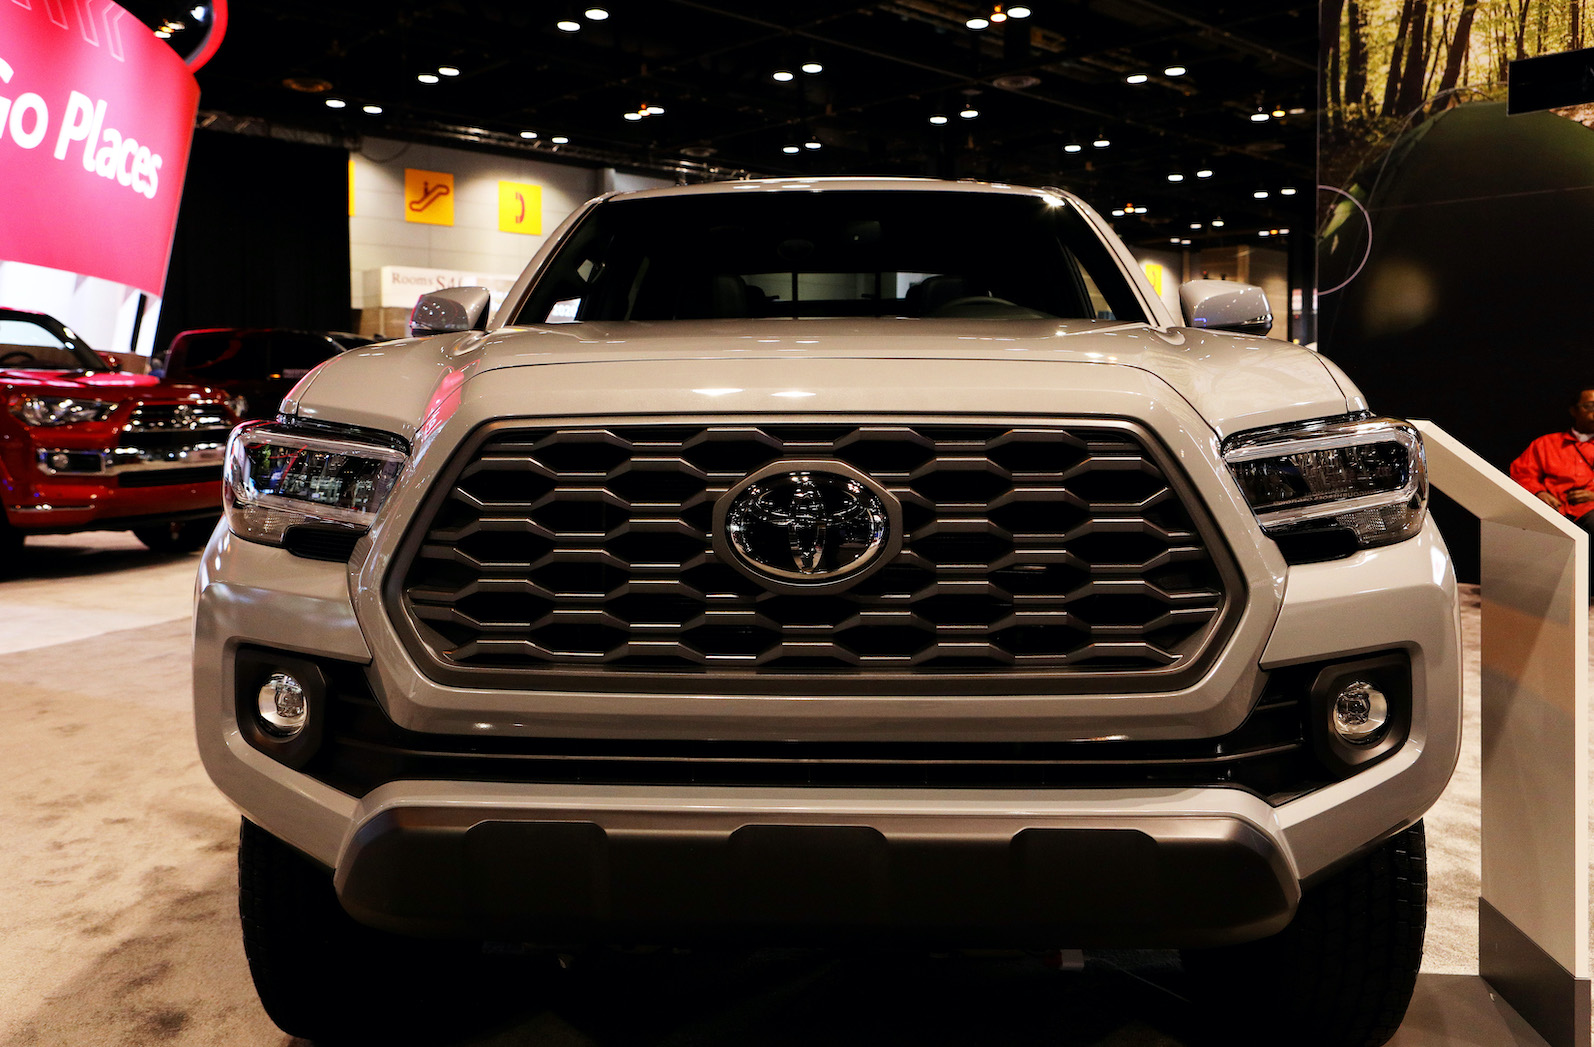 2020 Toyota Tacoma TRD 4x4 is on display at the 112th Annual Chicago Auto Show